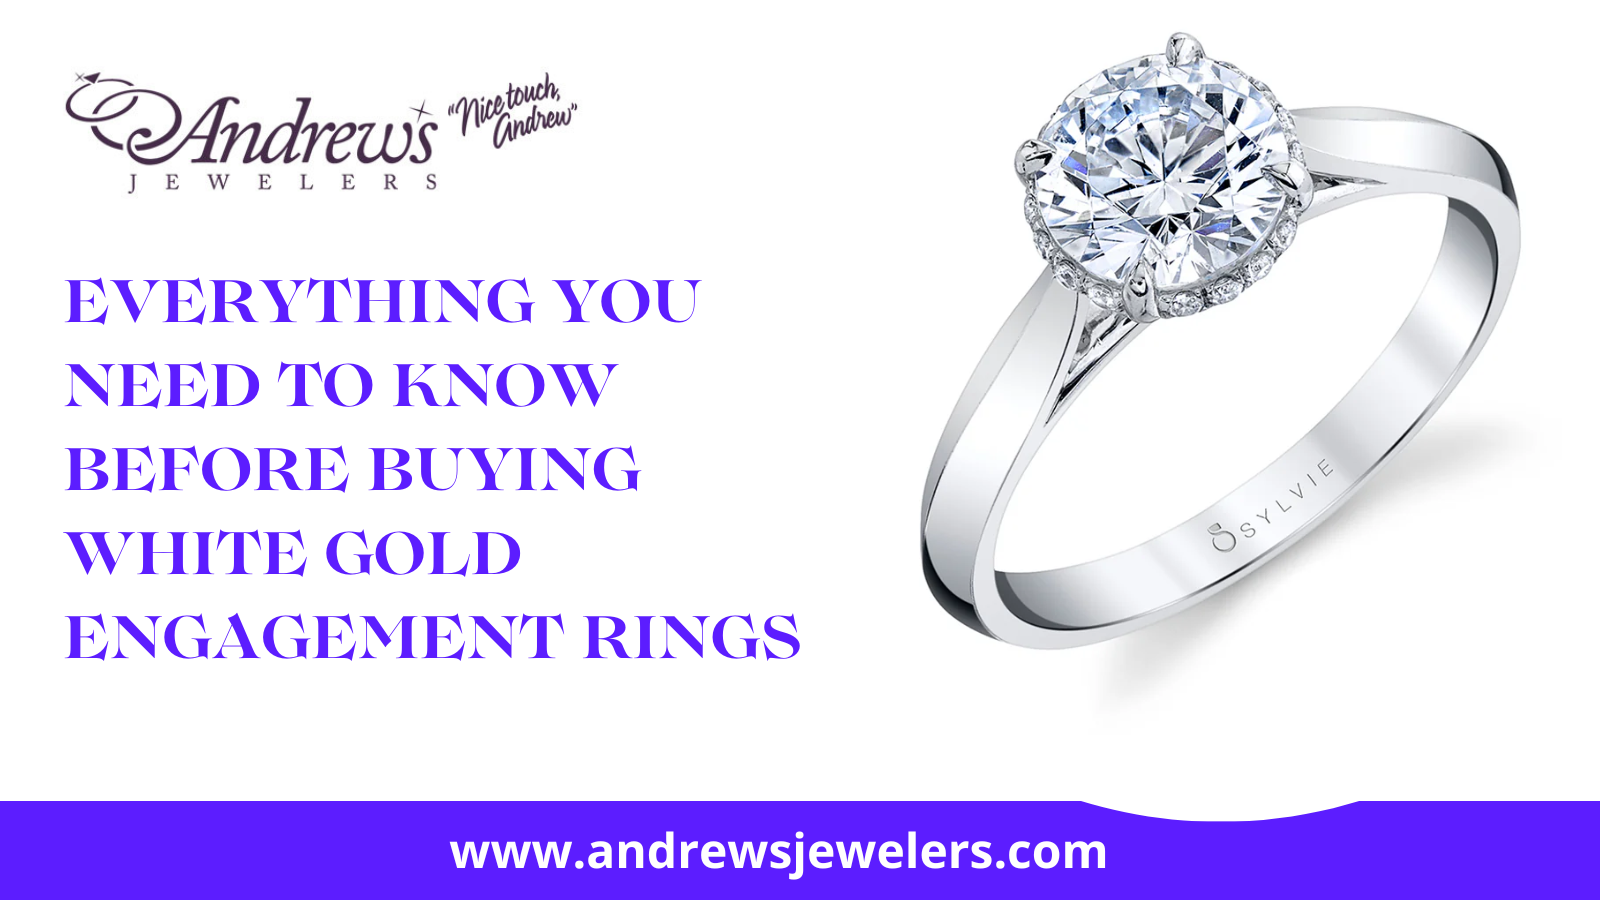 EVERYTHING YOU NEED TO KNOW BEFORE BUYING WHITE GOLD ENGAGEMENT RINGS | Zupyak